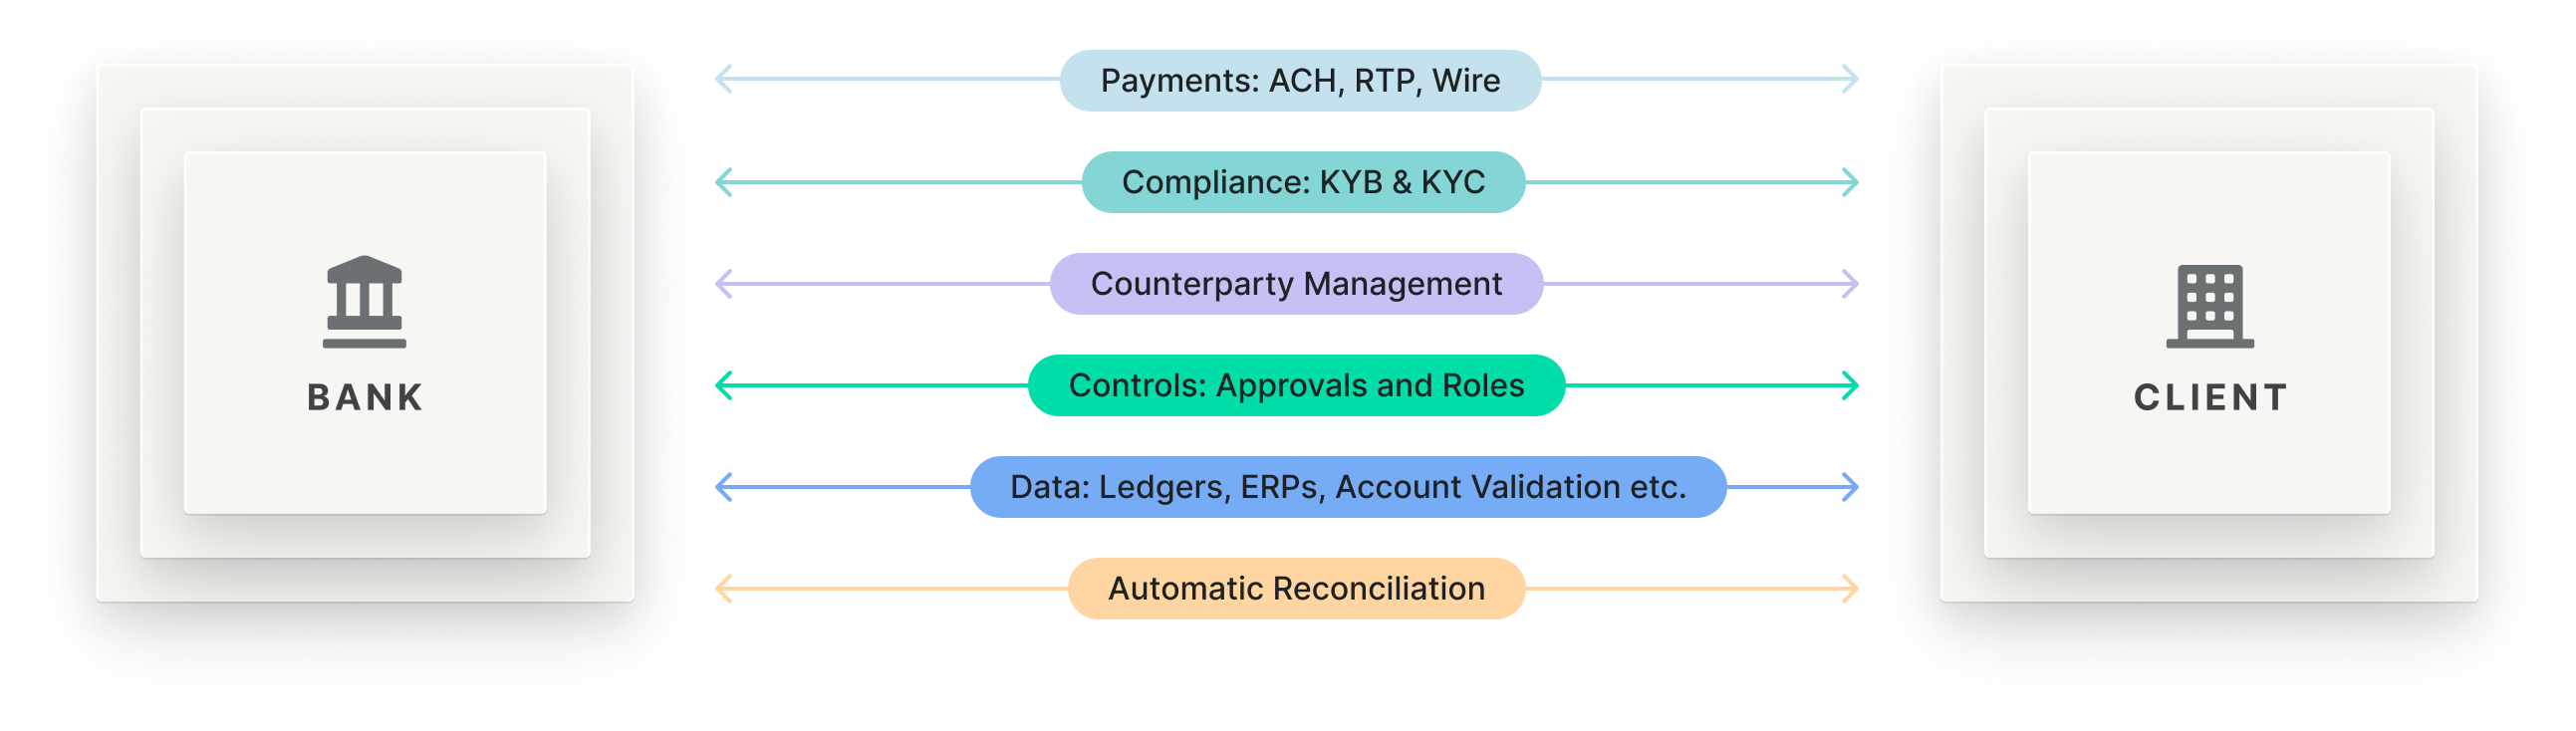 Modern Treasury payments and software workflows